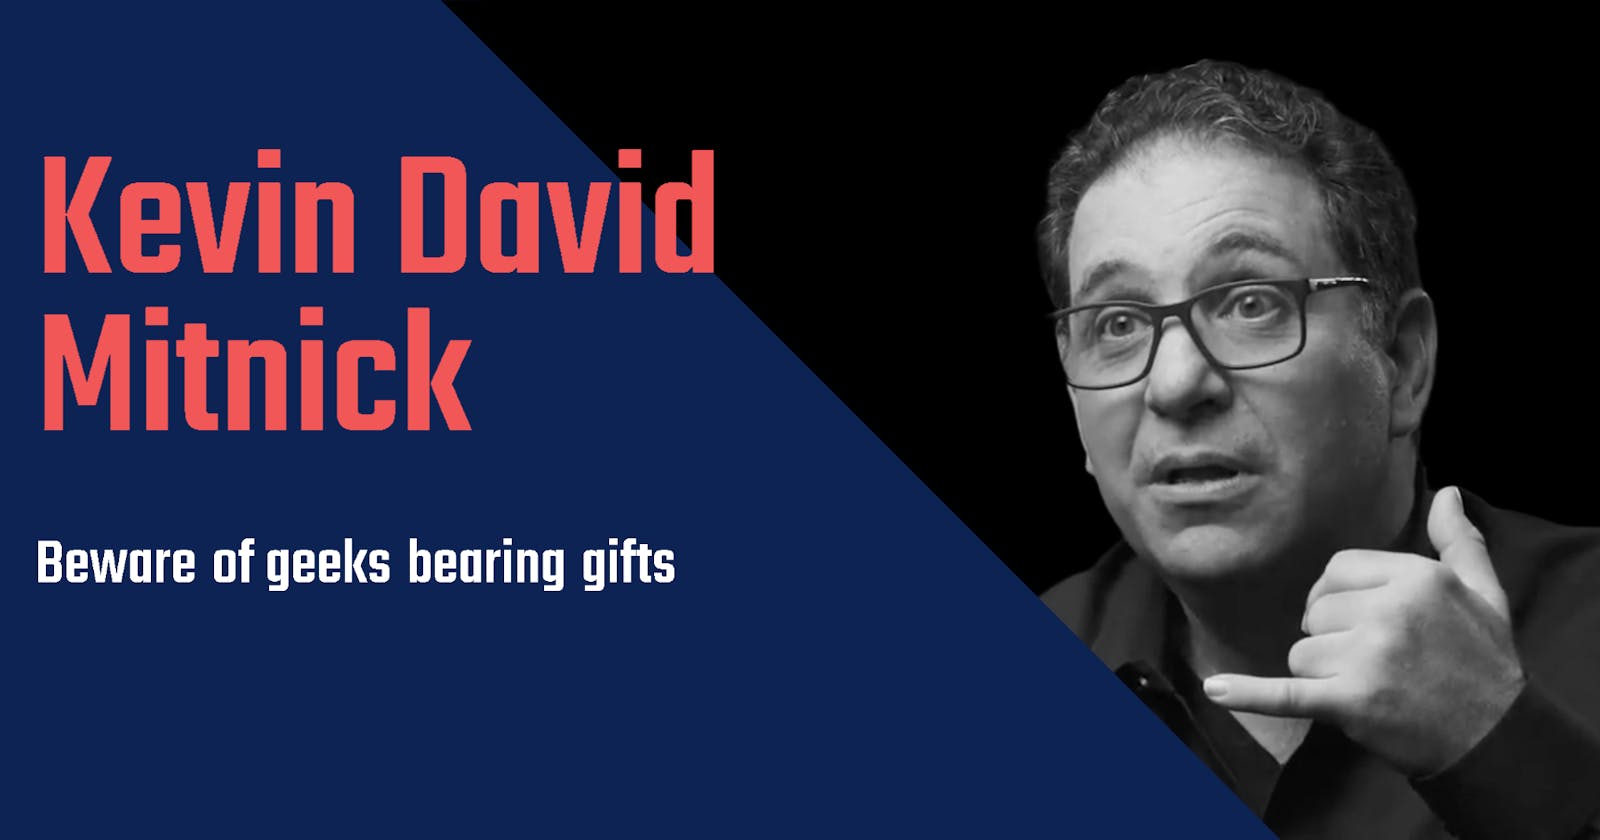 Kevin David Mitnick: The Life of an Infamous Hacker